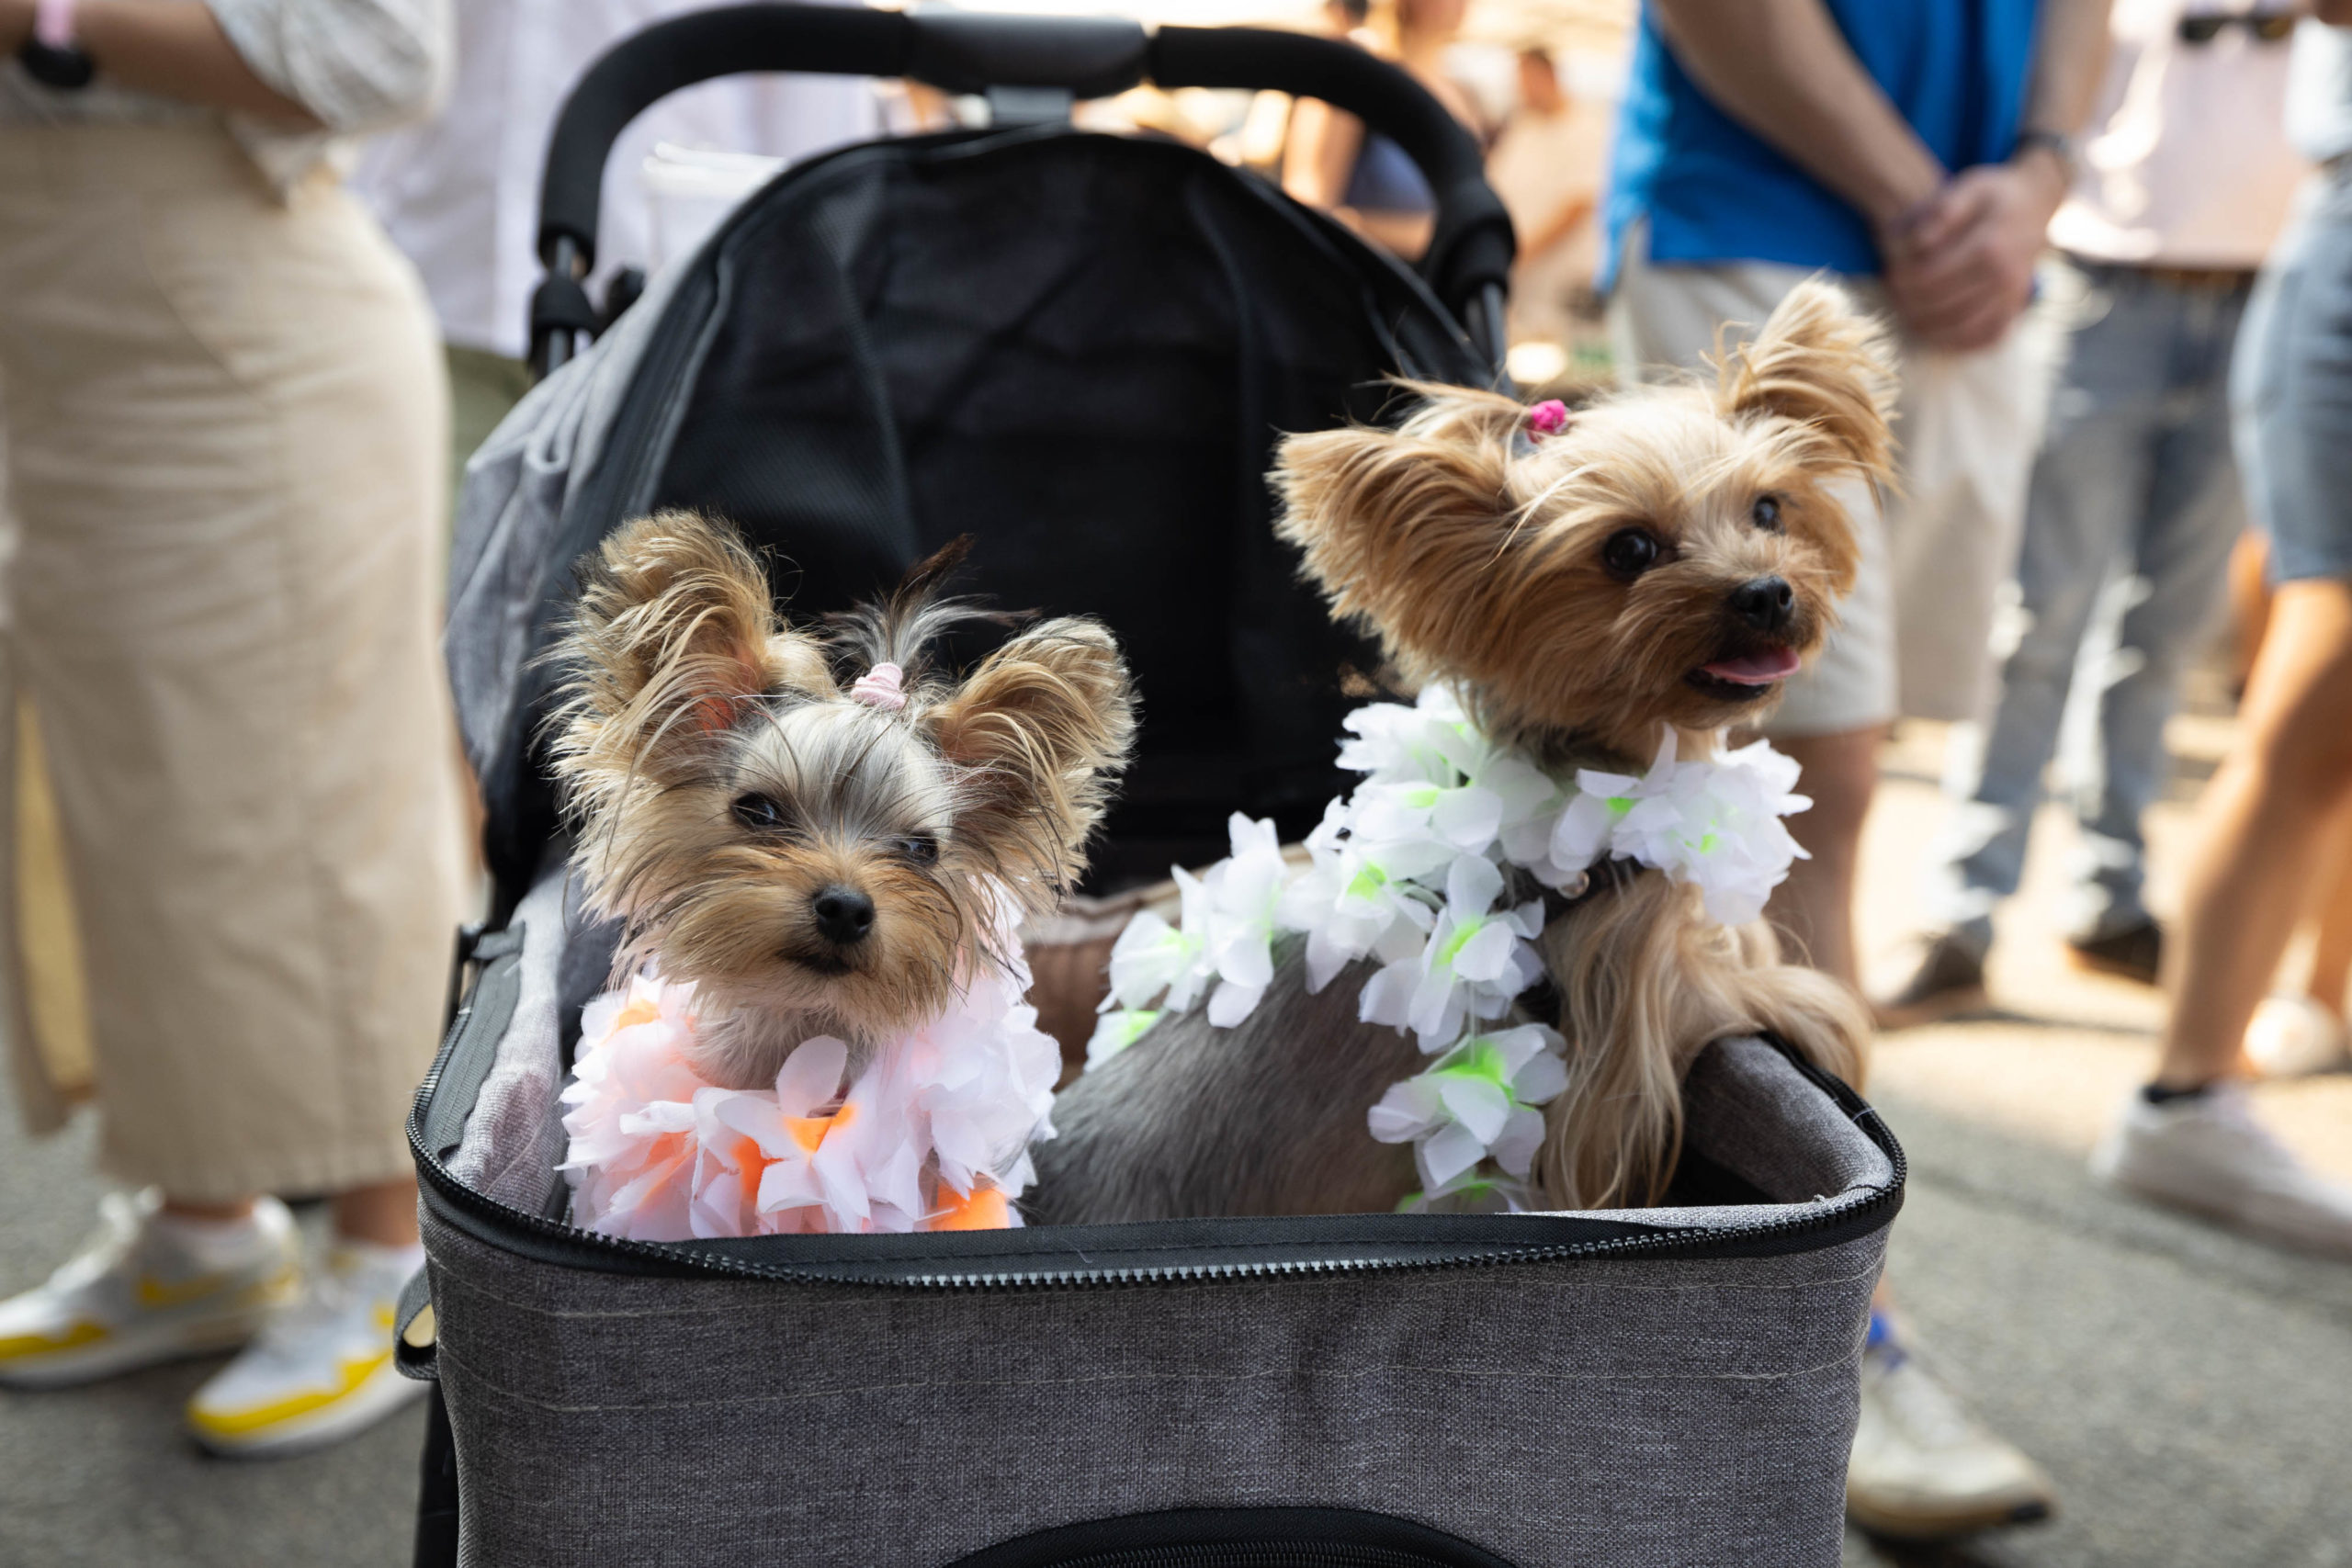 Two yorkies are in a stroller for pet-a-palooza pet festival in Yaletown